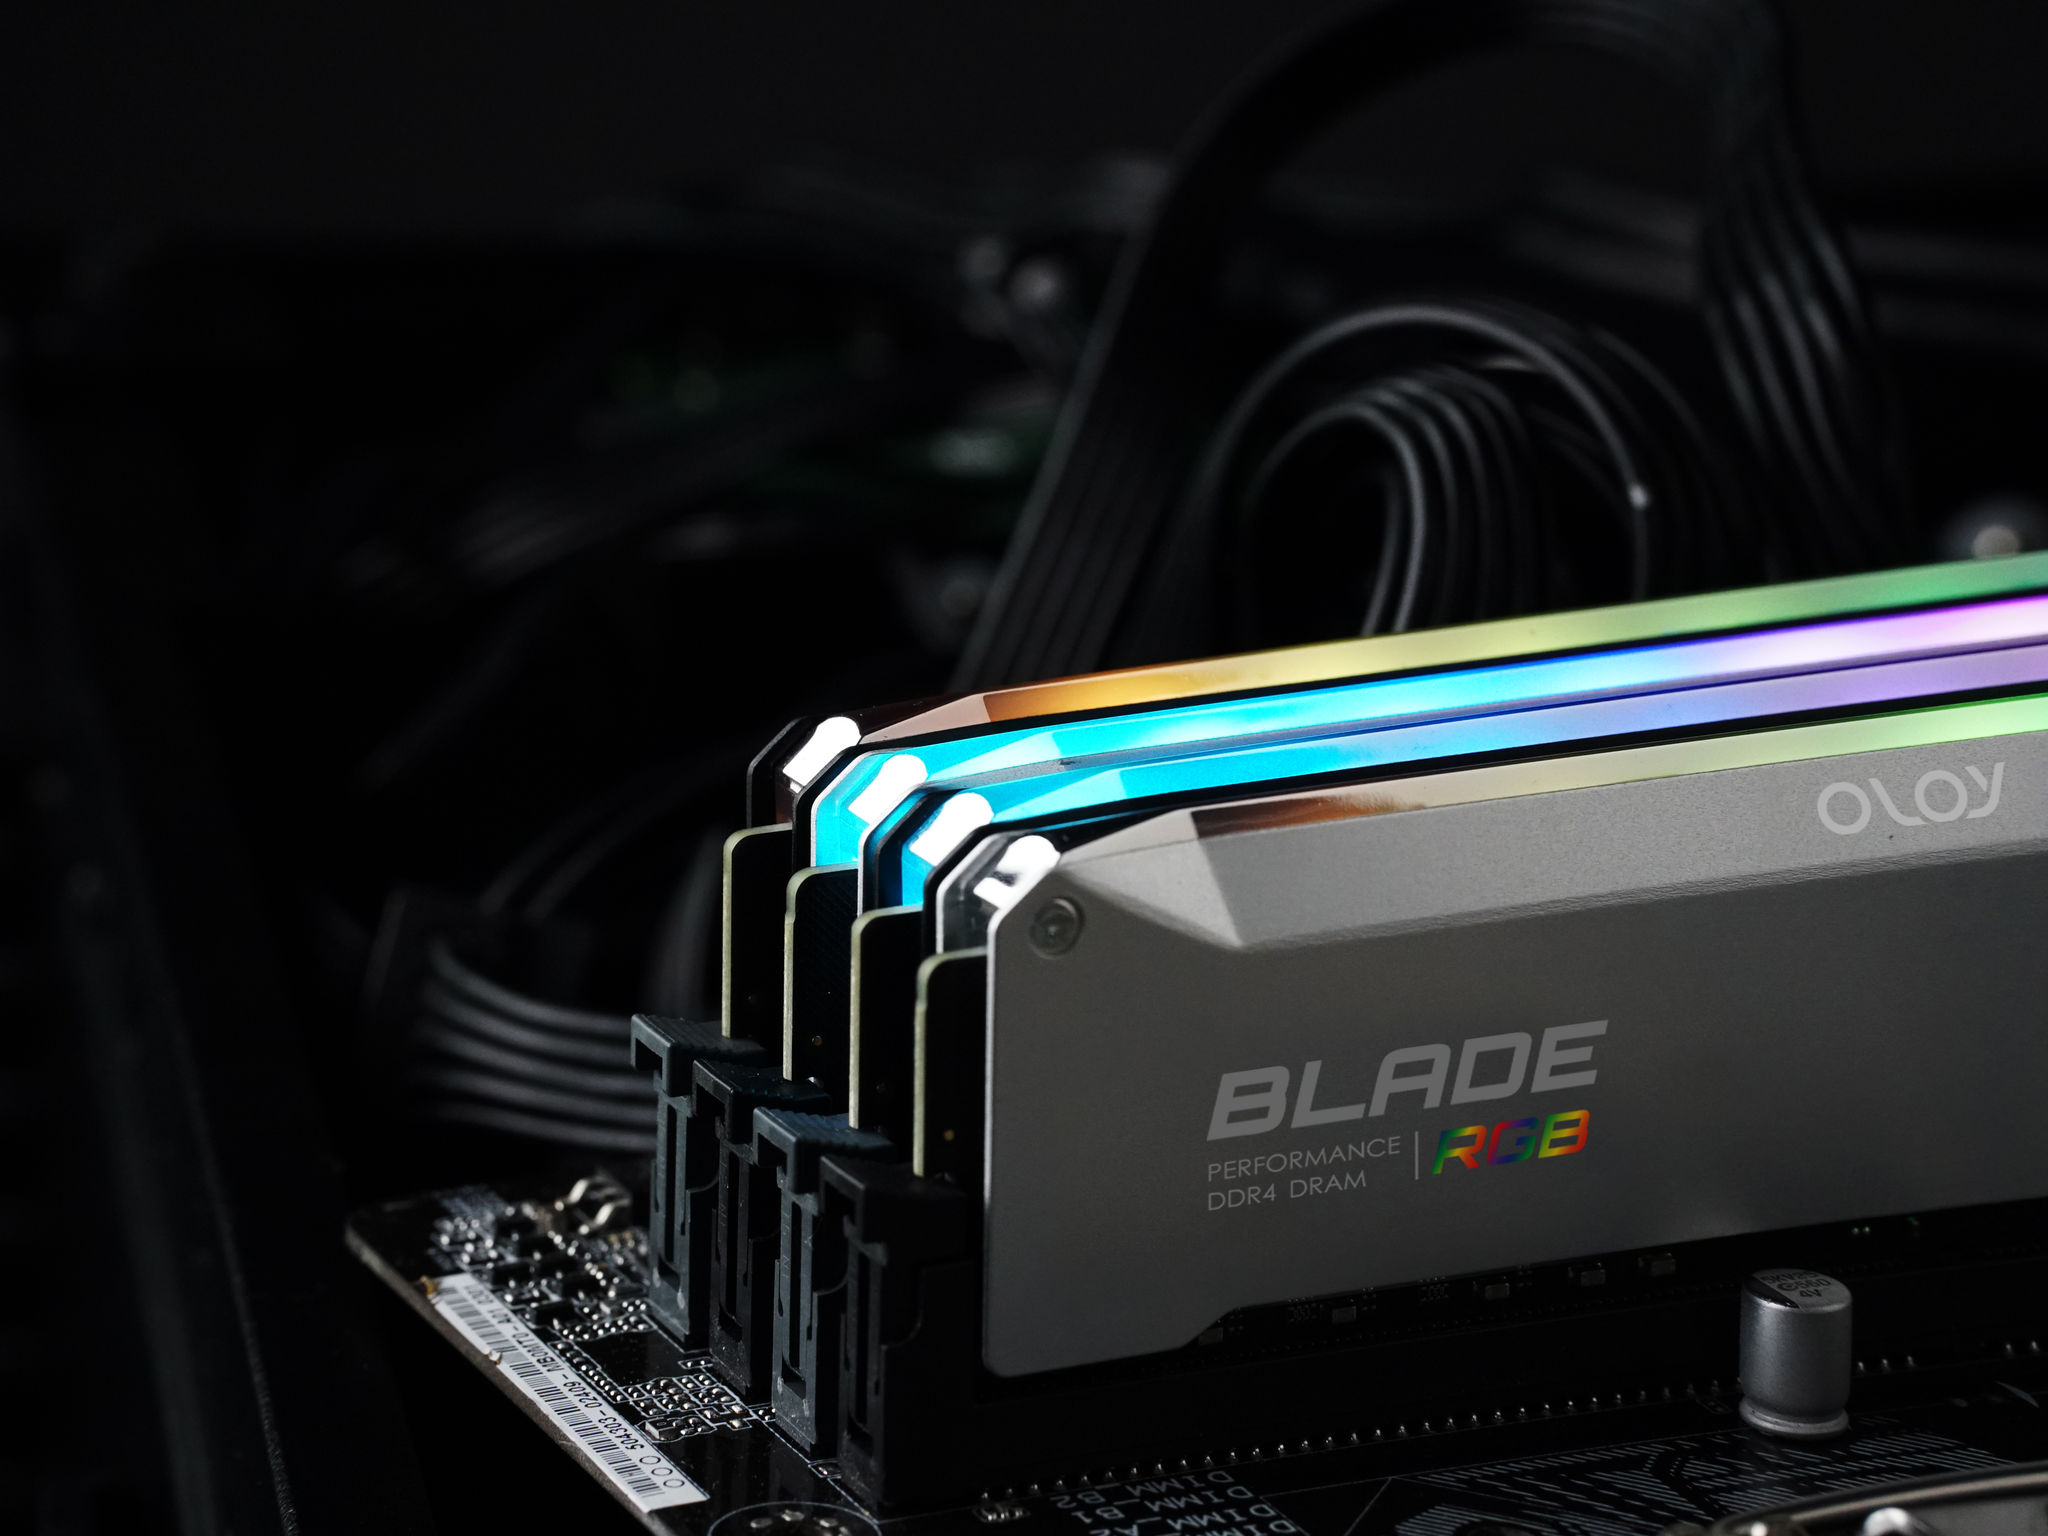 OLOy Blade DDR4 Memory